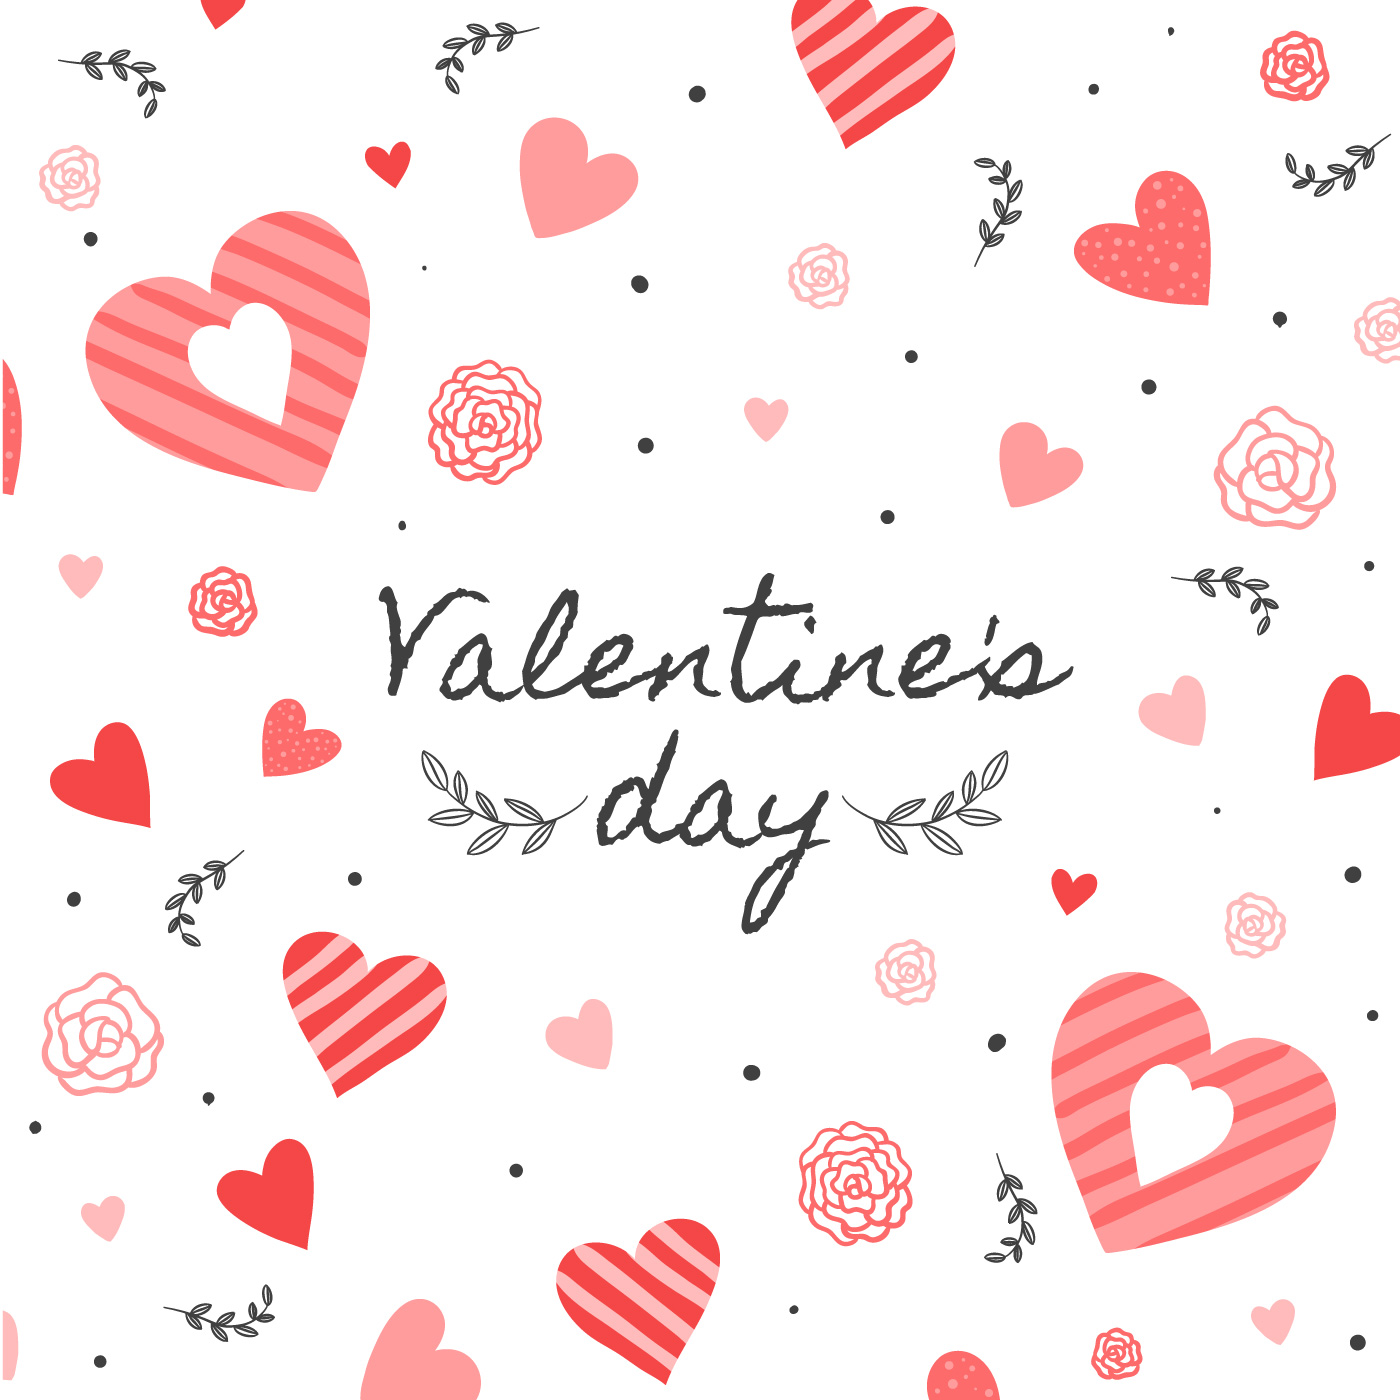 999 valentines cute background for your romantic mood